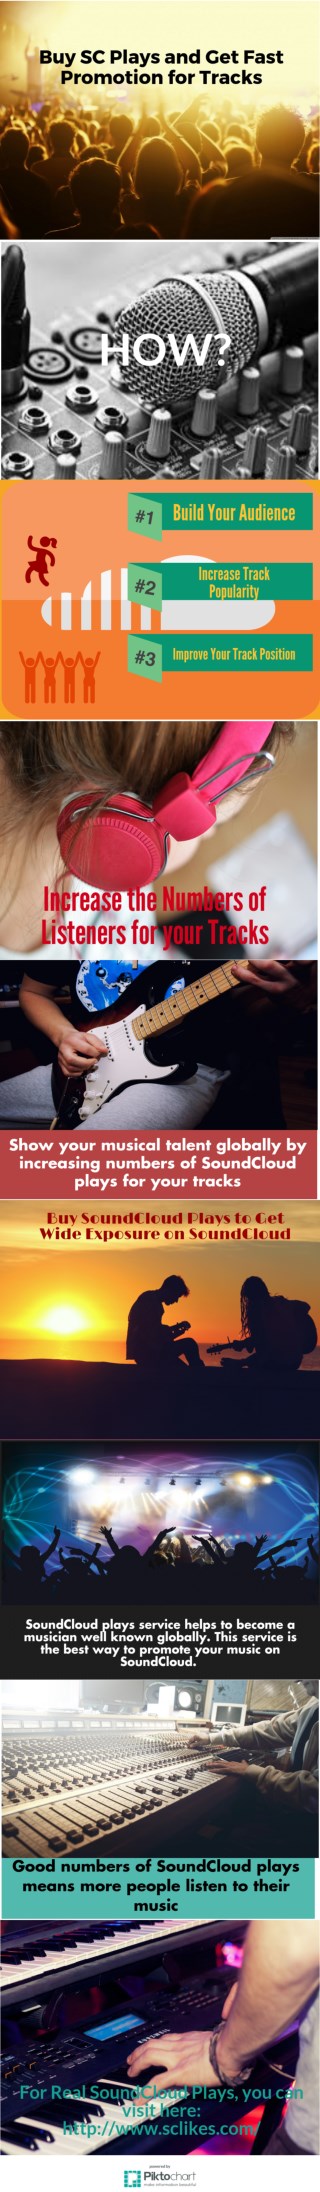 Buy SC Plays and Get Fast Promotion for Tracks